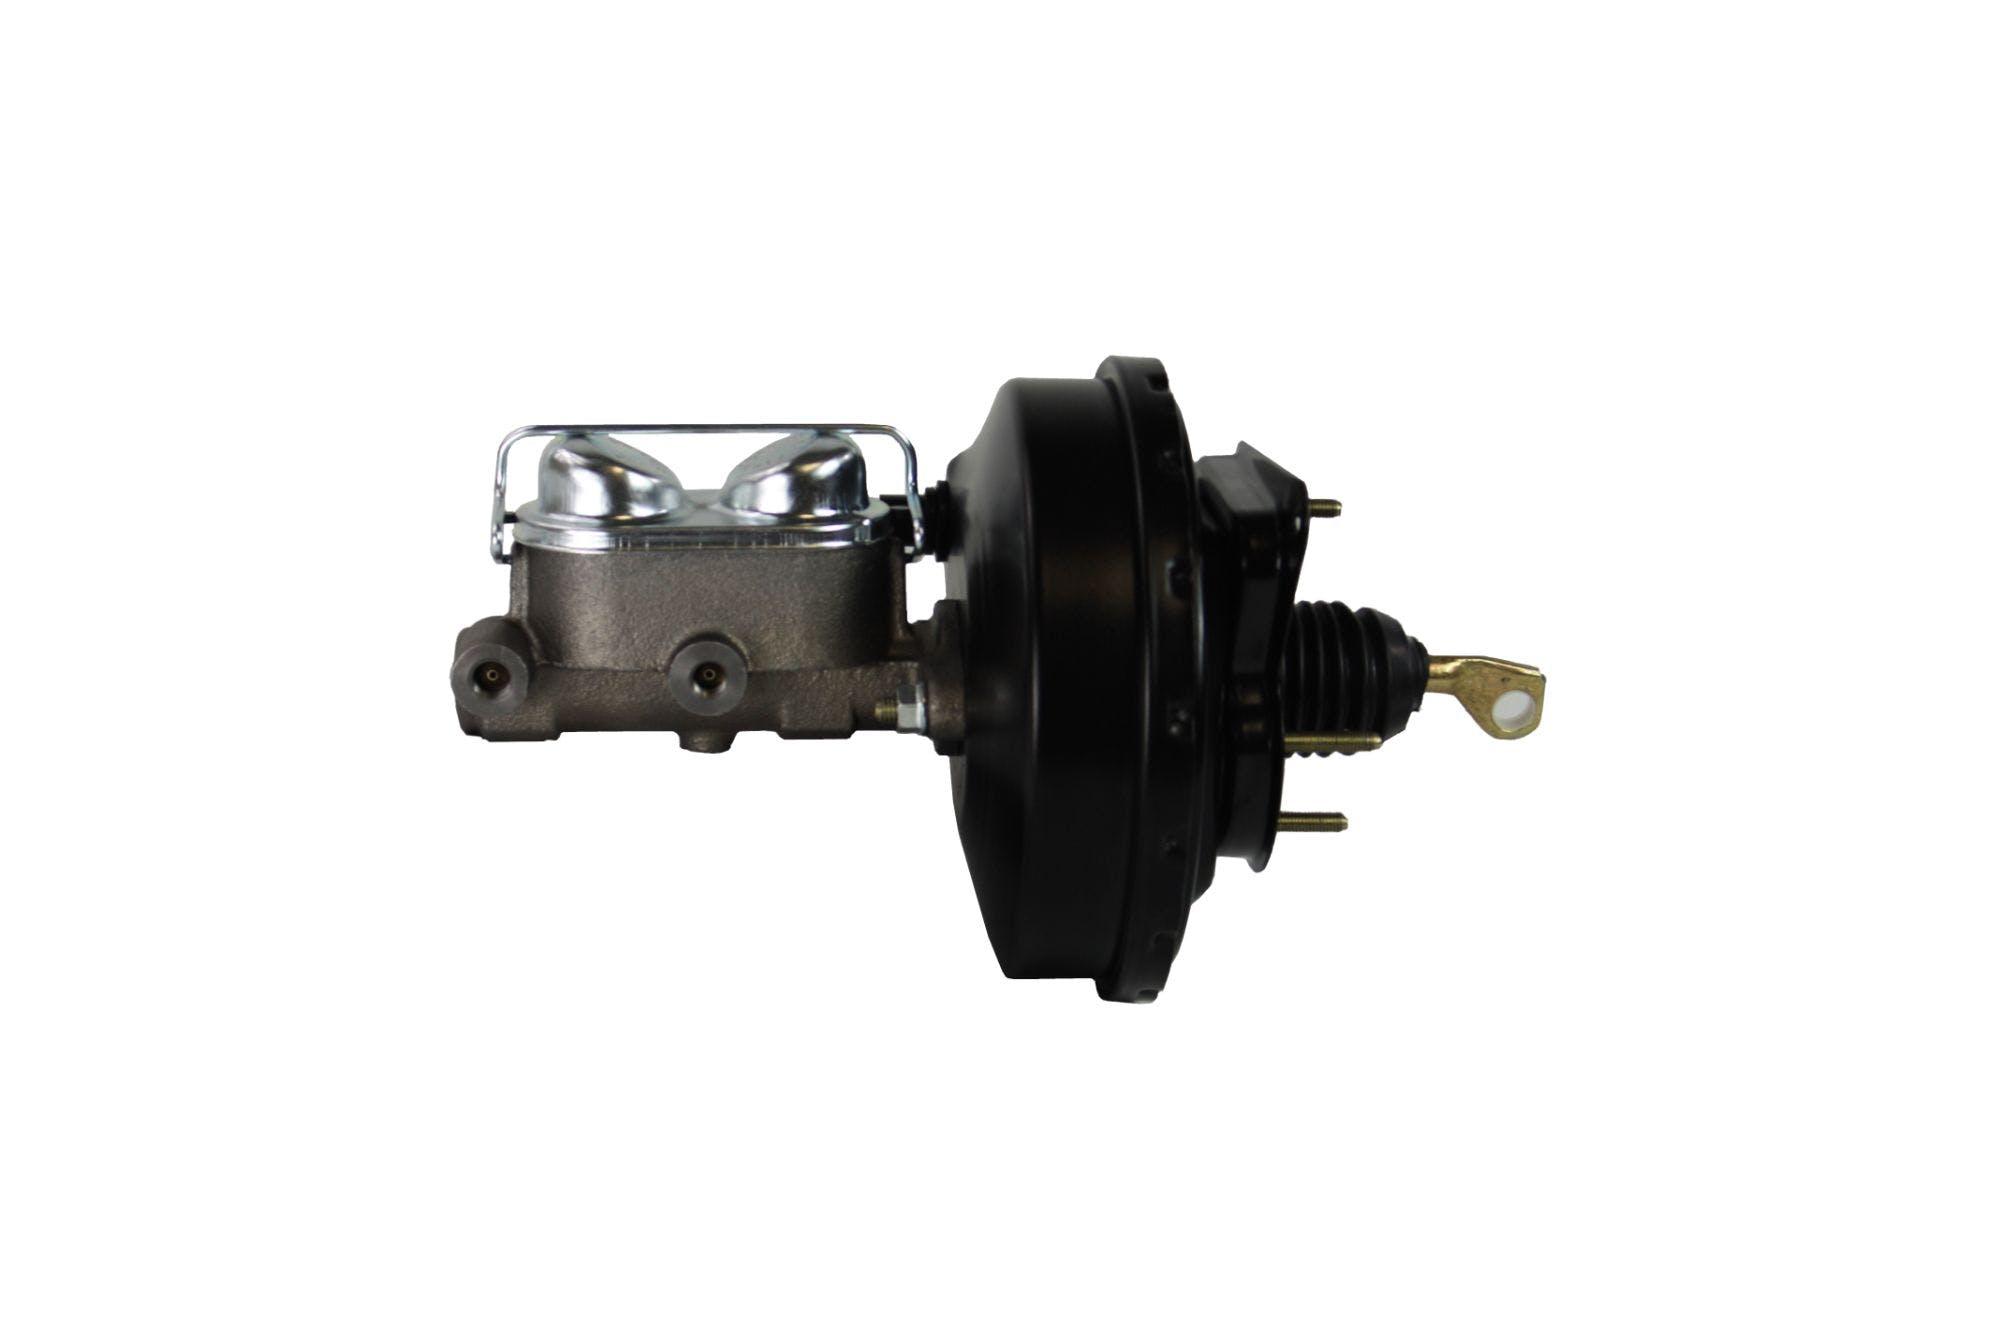 LEED Brakes FC0037HK Hydraulic Kit, Power Drum Brakes, 9 inch Black Booster Cast Iron Master Cylinder